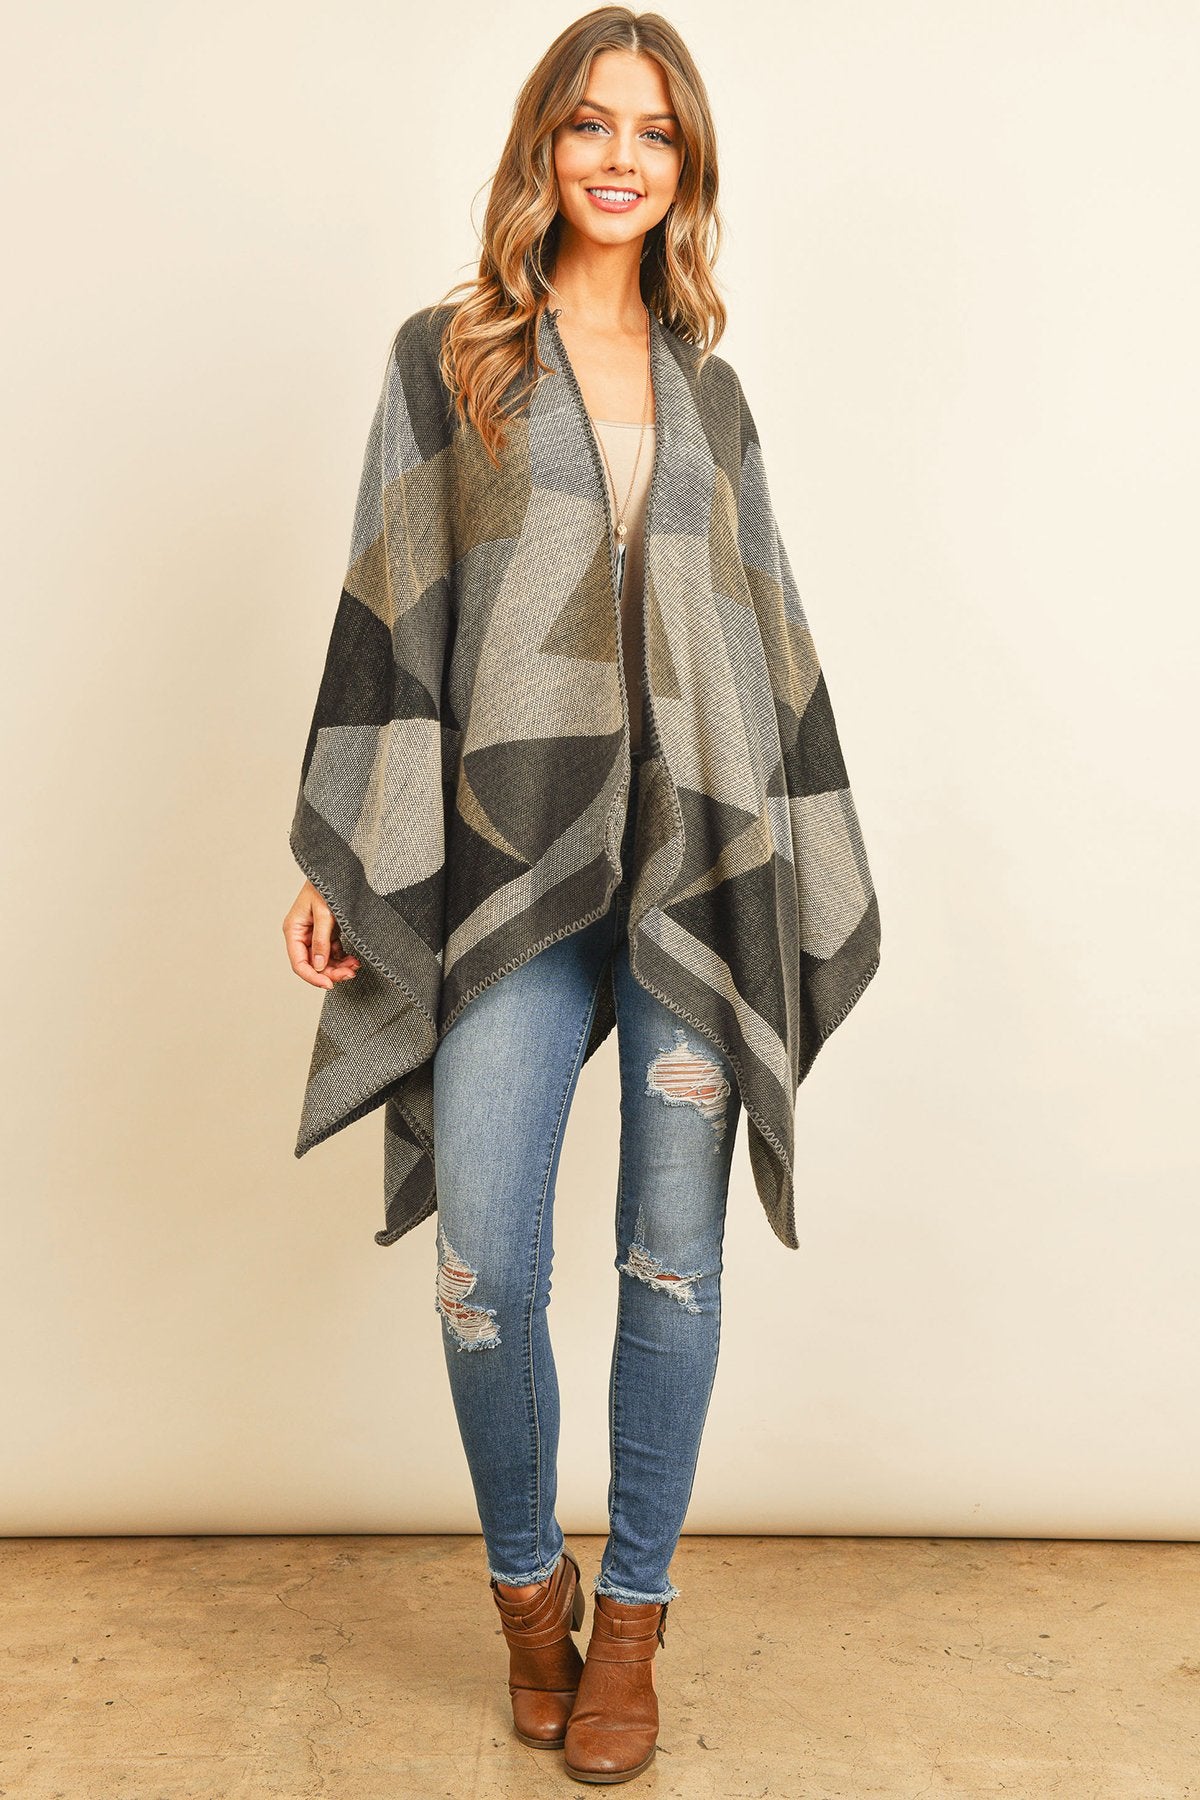 Hdf3149br - Brown Abstract Pattern Open Front Kimono - LOLA LUXE